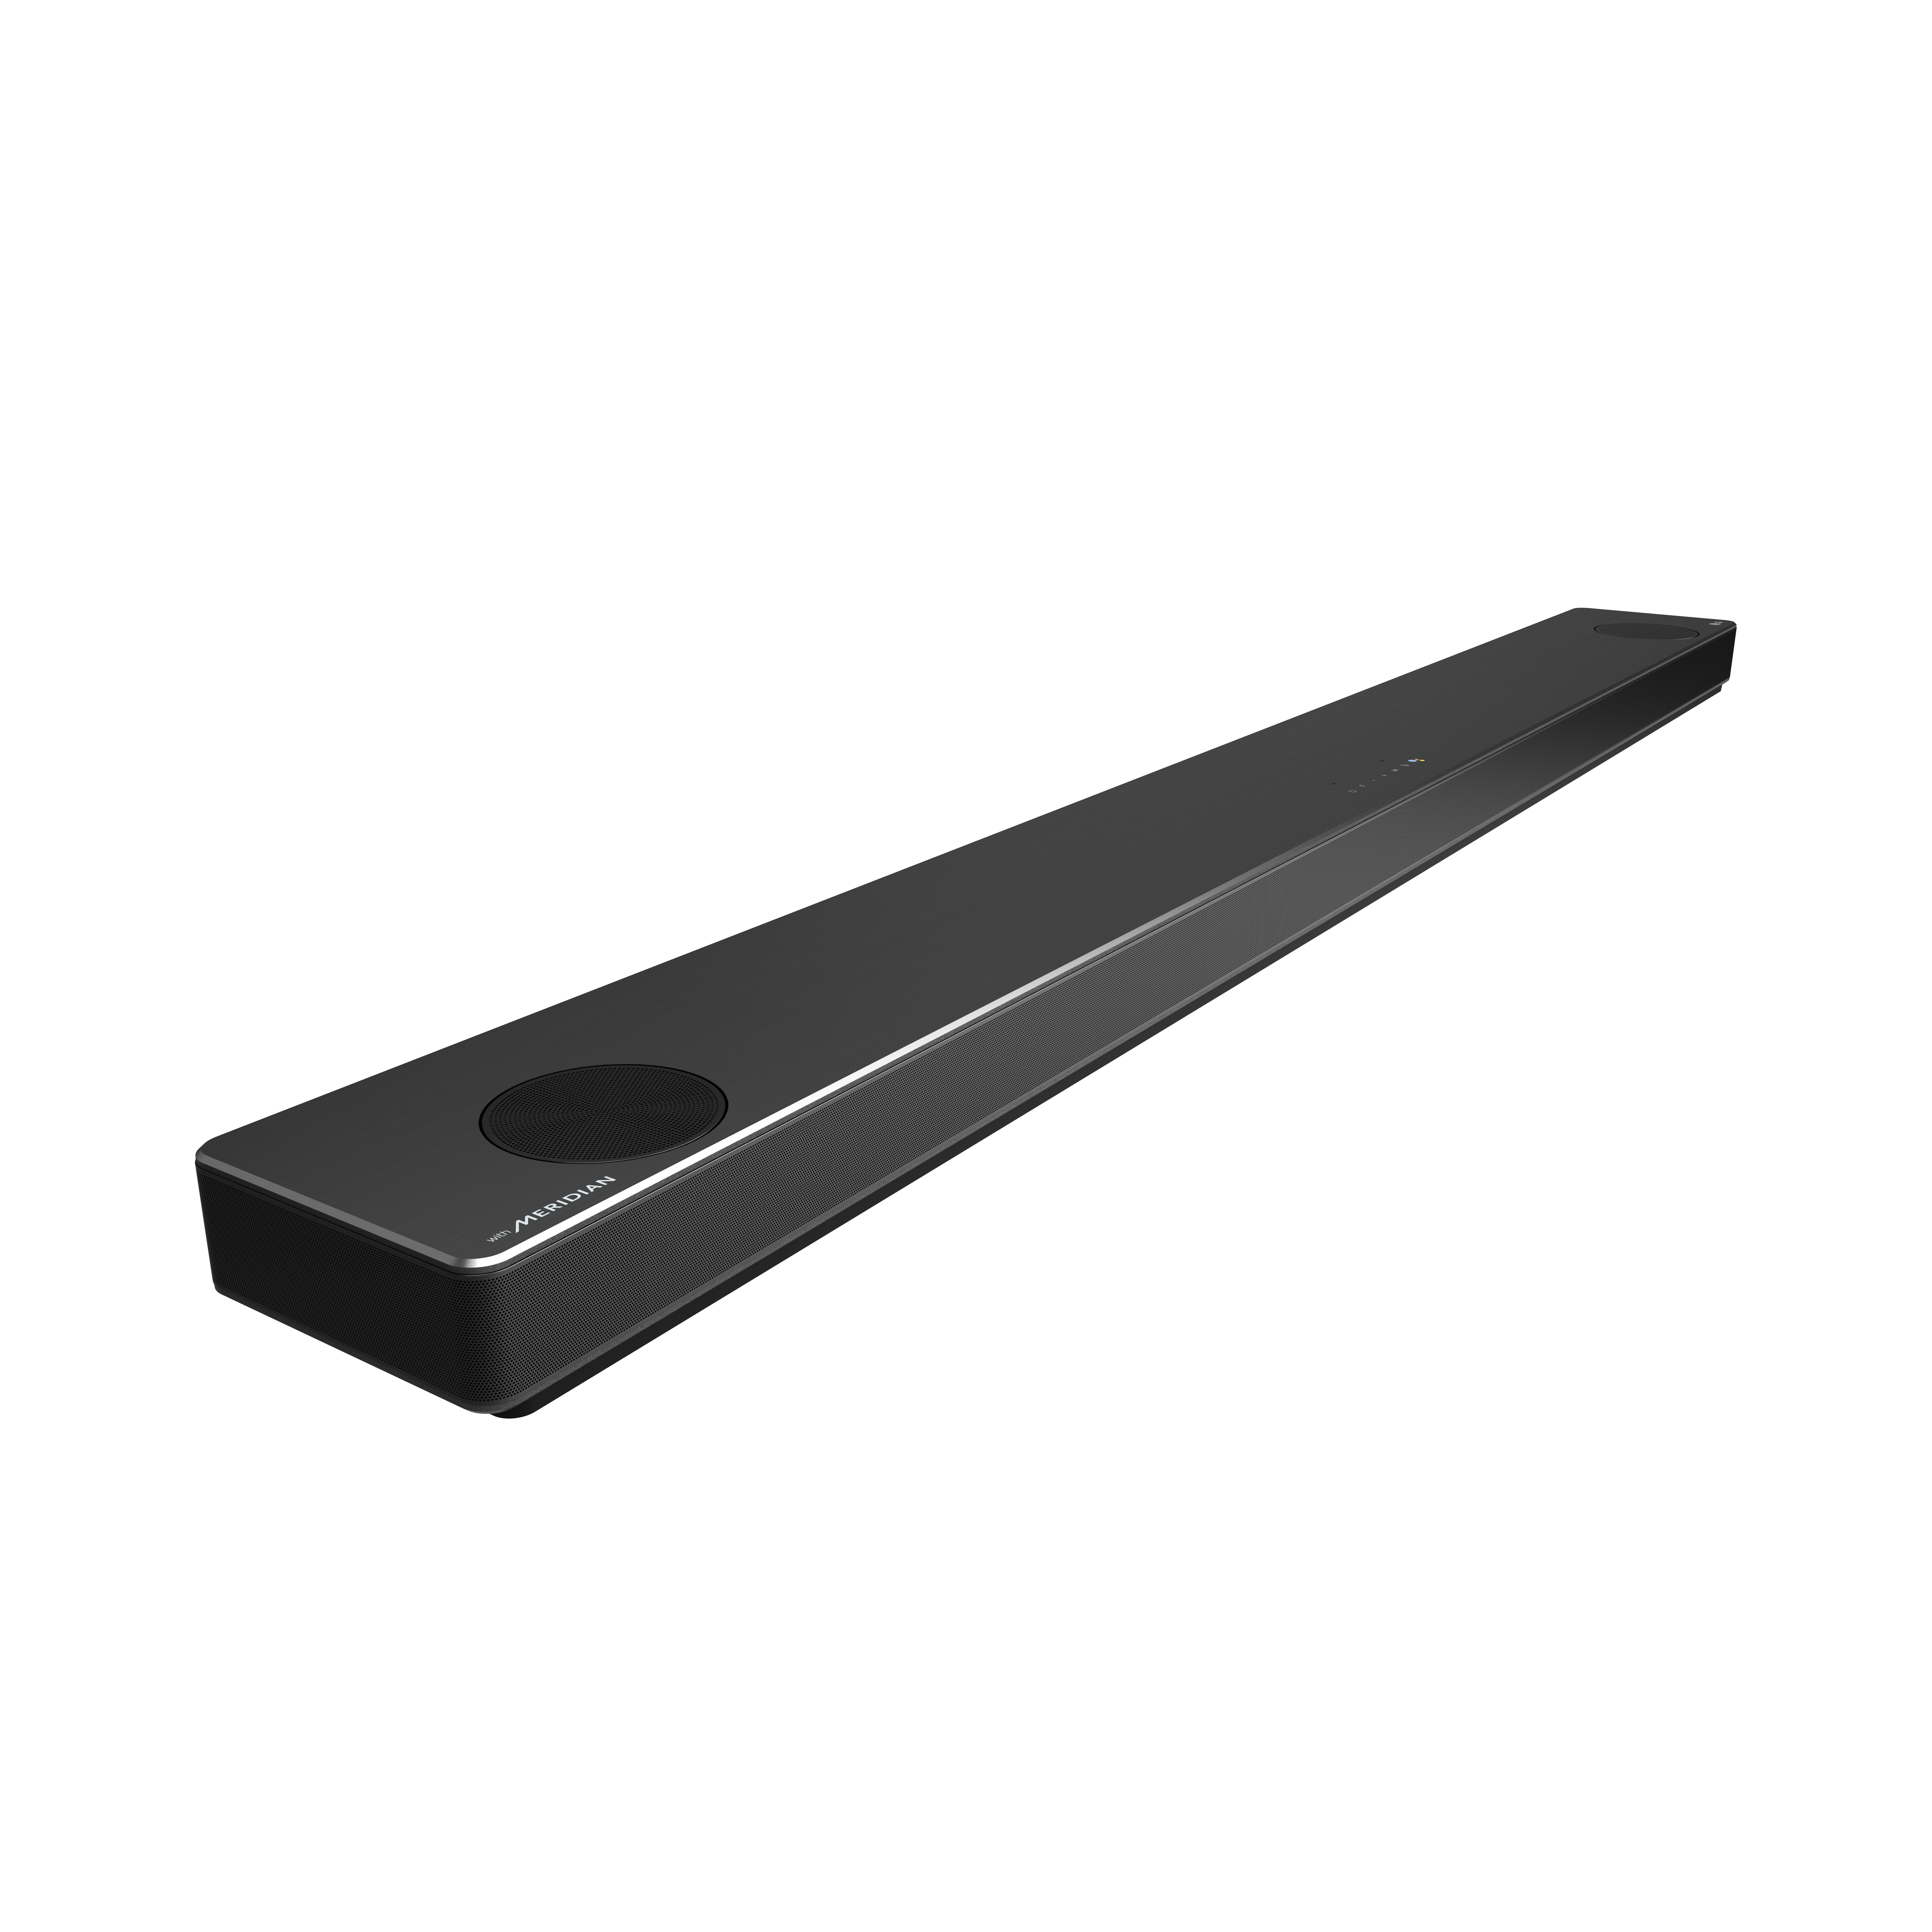 LG 7.1.4 Channel High-Res Audio Sound Bar with Dolby Atmos, Surround Speakers and Google Assistant Built-in - image 3 of 21